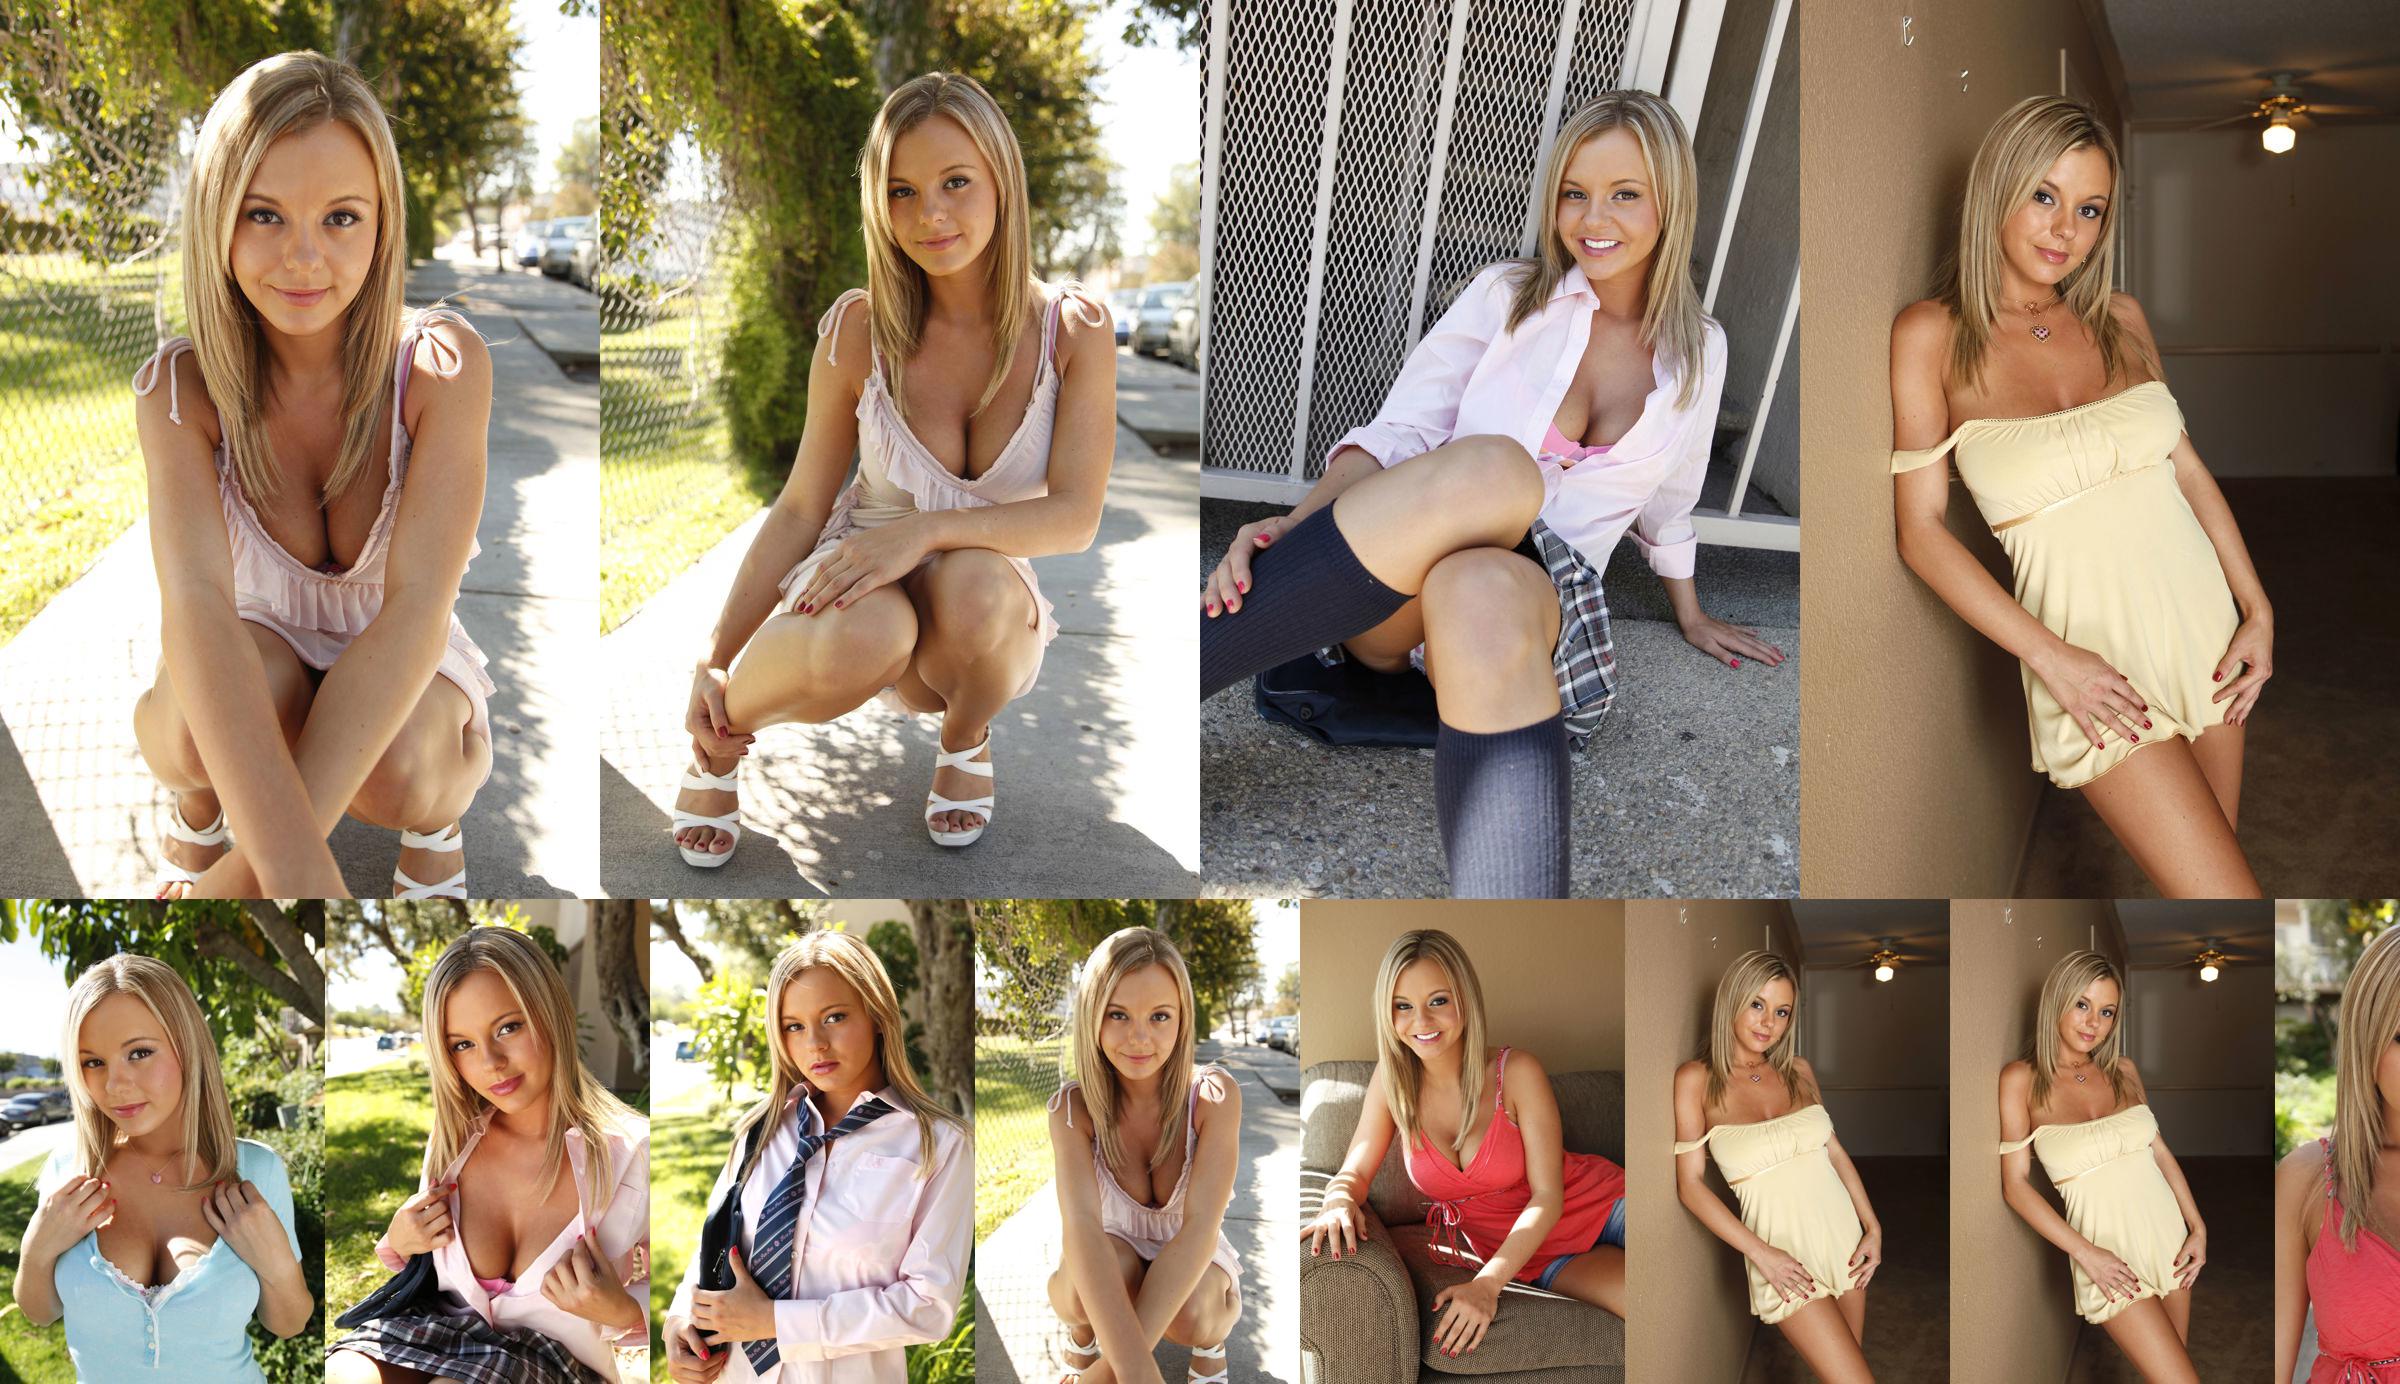 [LOVEPOP] Belle FILLE d'outre-mer - Bree Olson パツキン Uniform Girl - PPV No.c5f5b6 Page 1